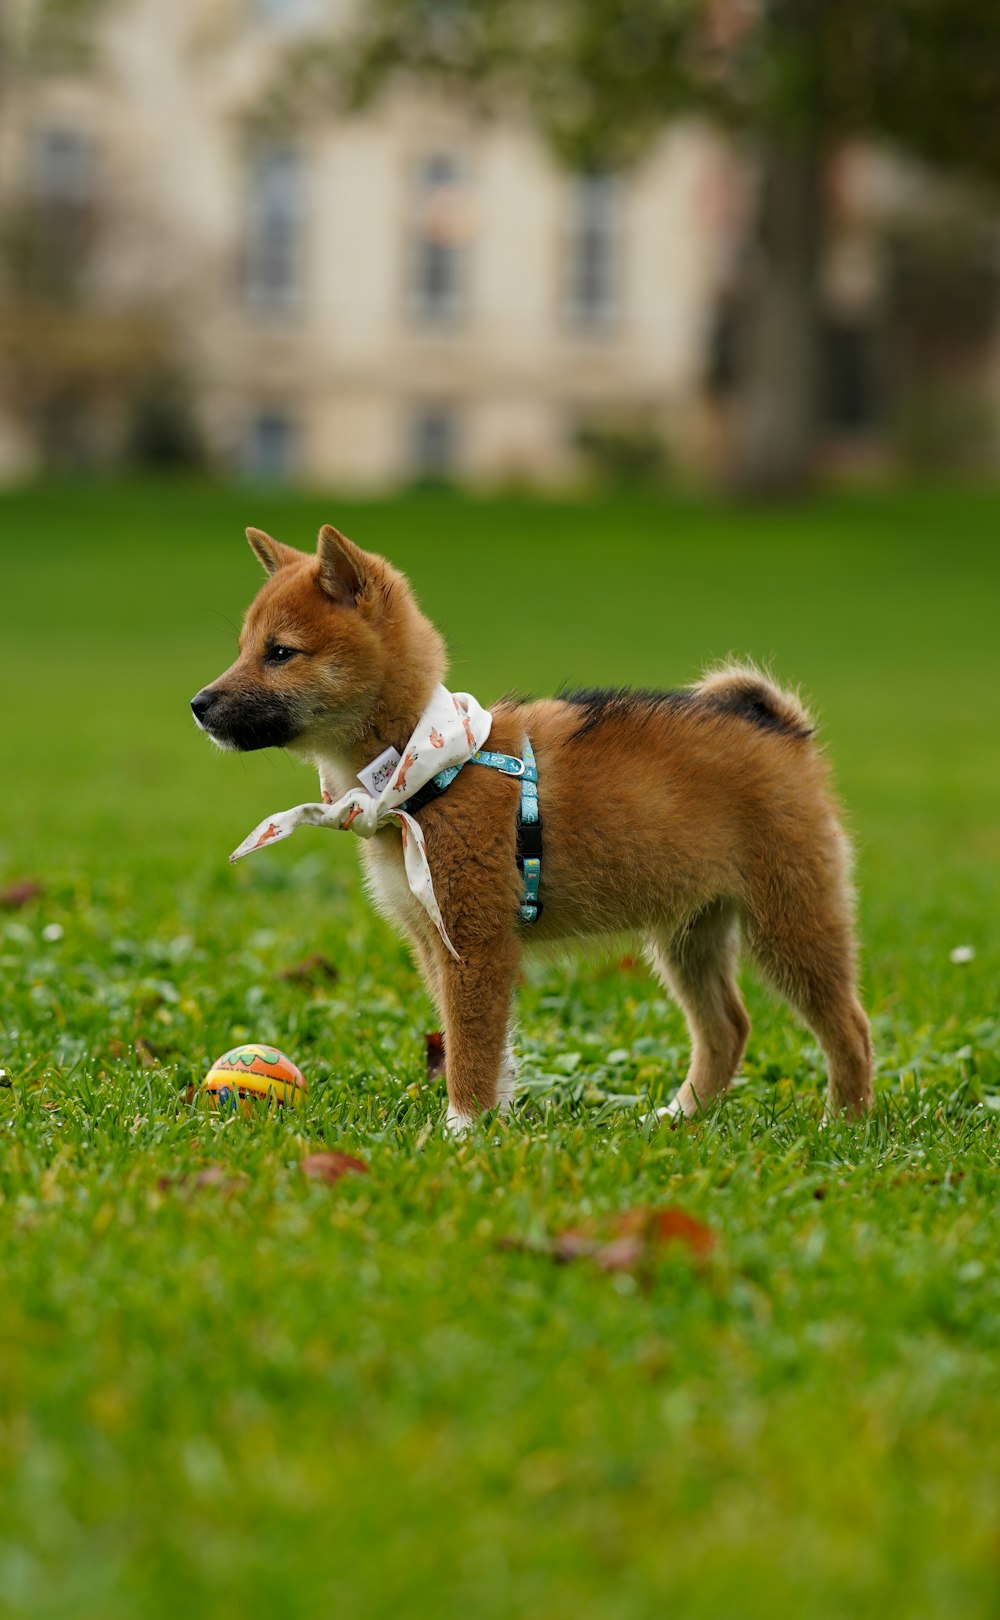 short-coated brown puppy on green grass during daytime